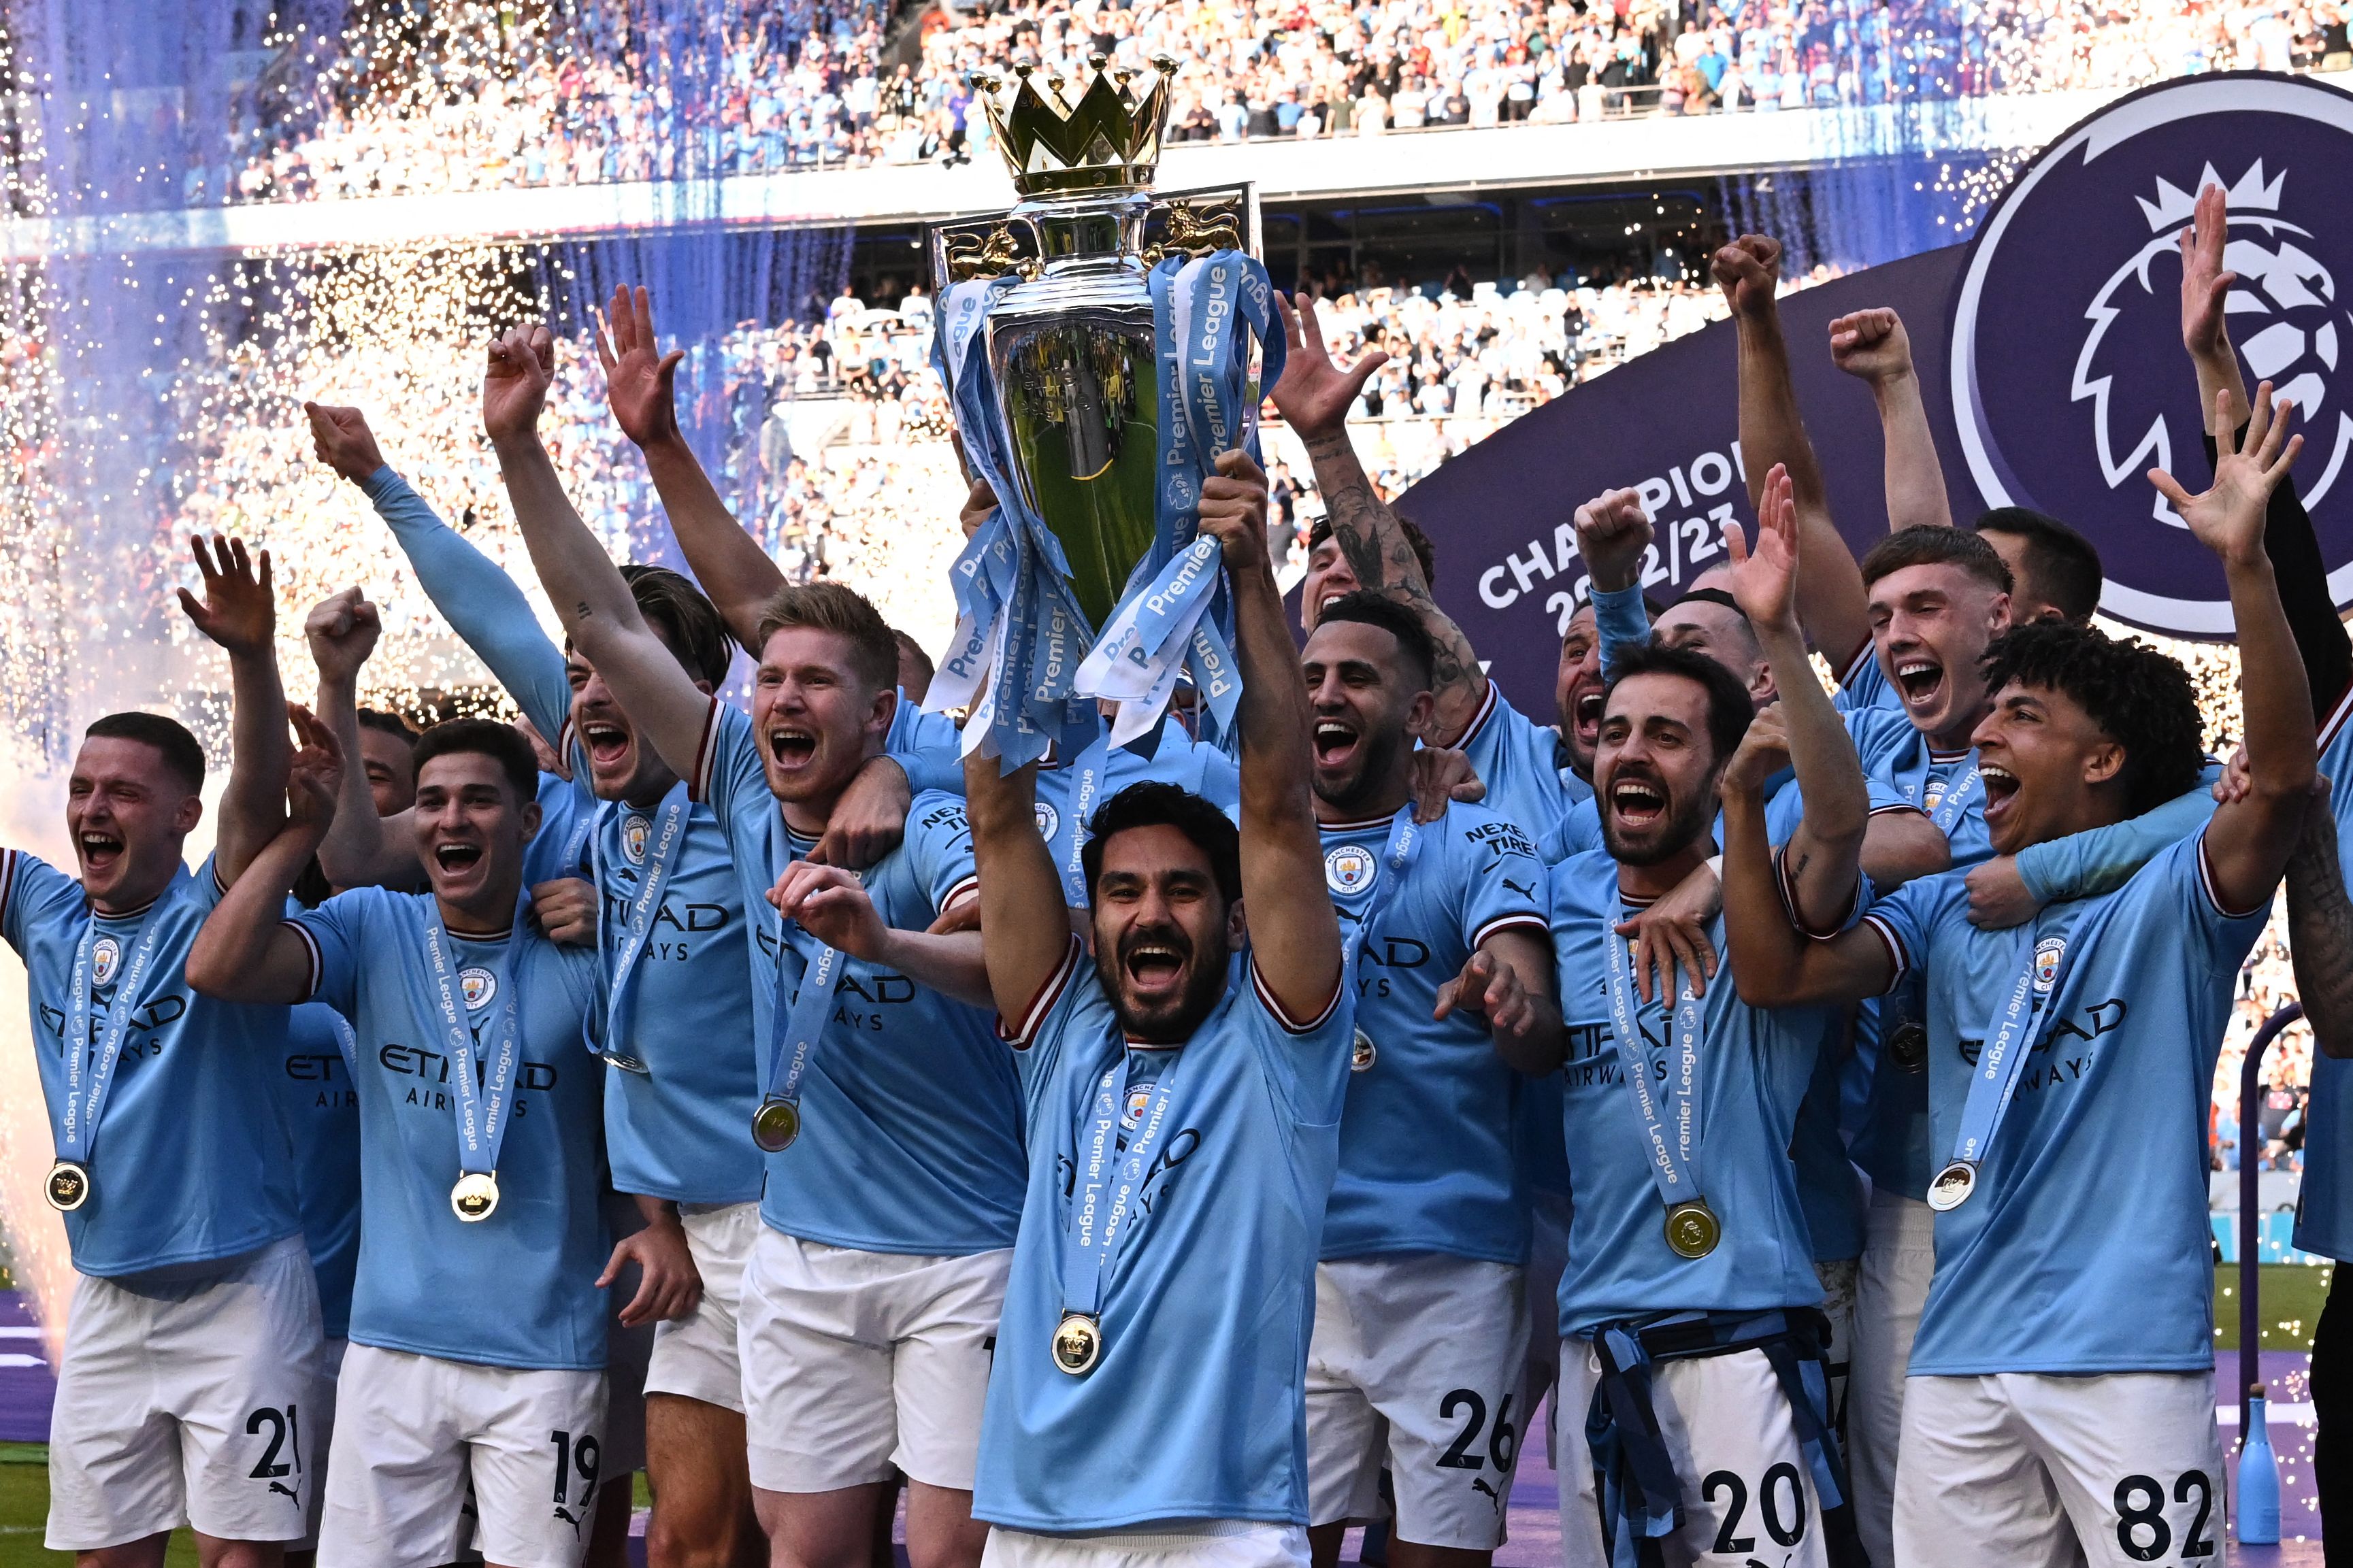 Manchester City celebrates the English Premier League title by defeating Chelsea